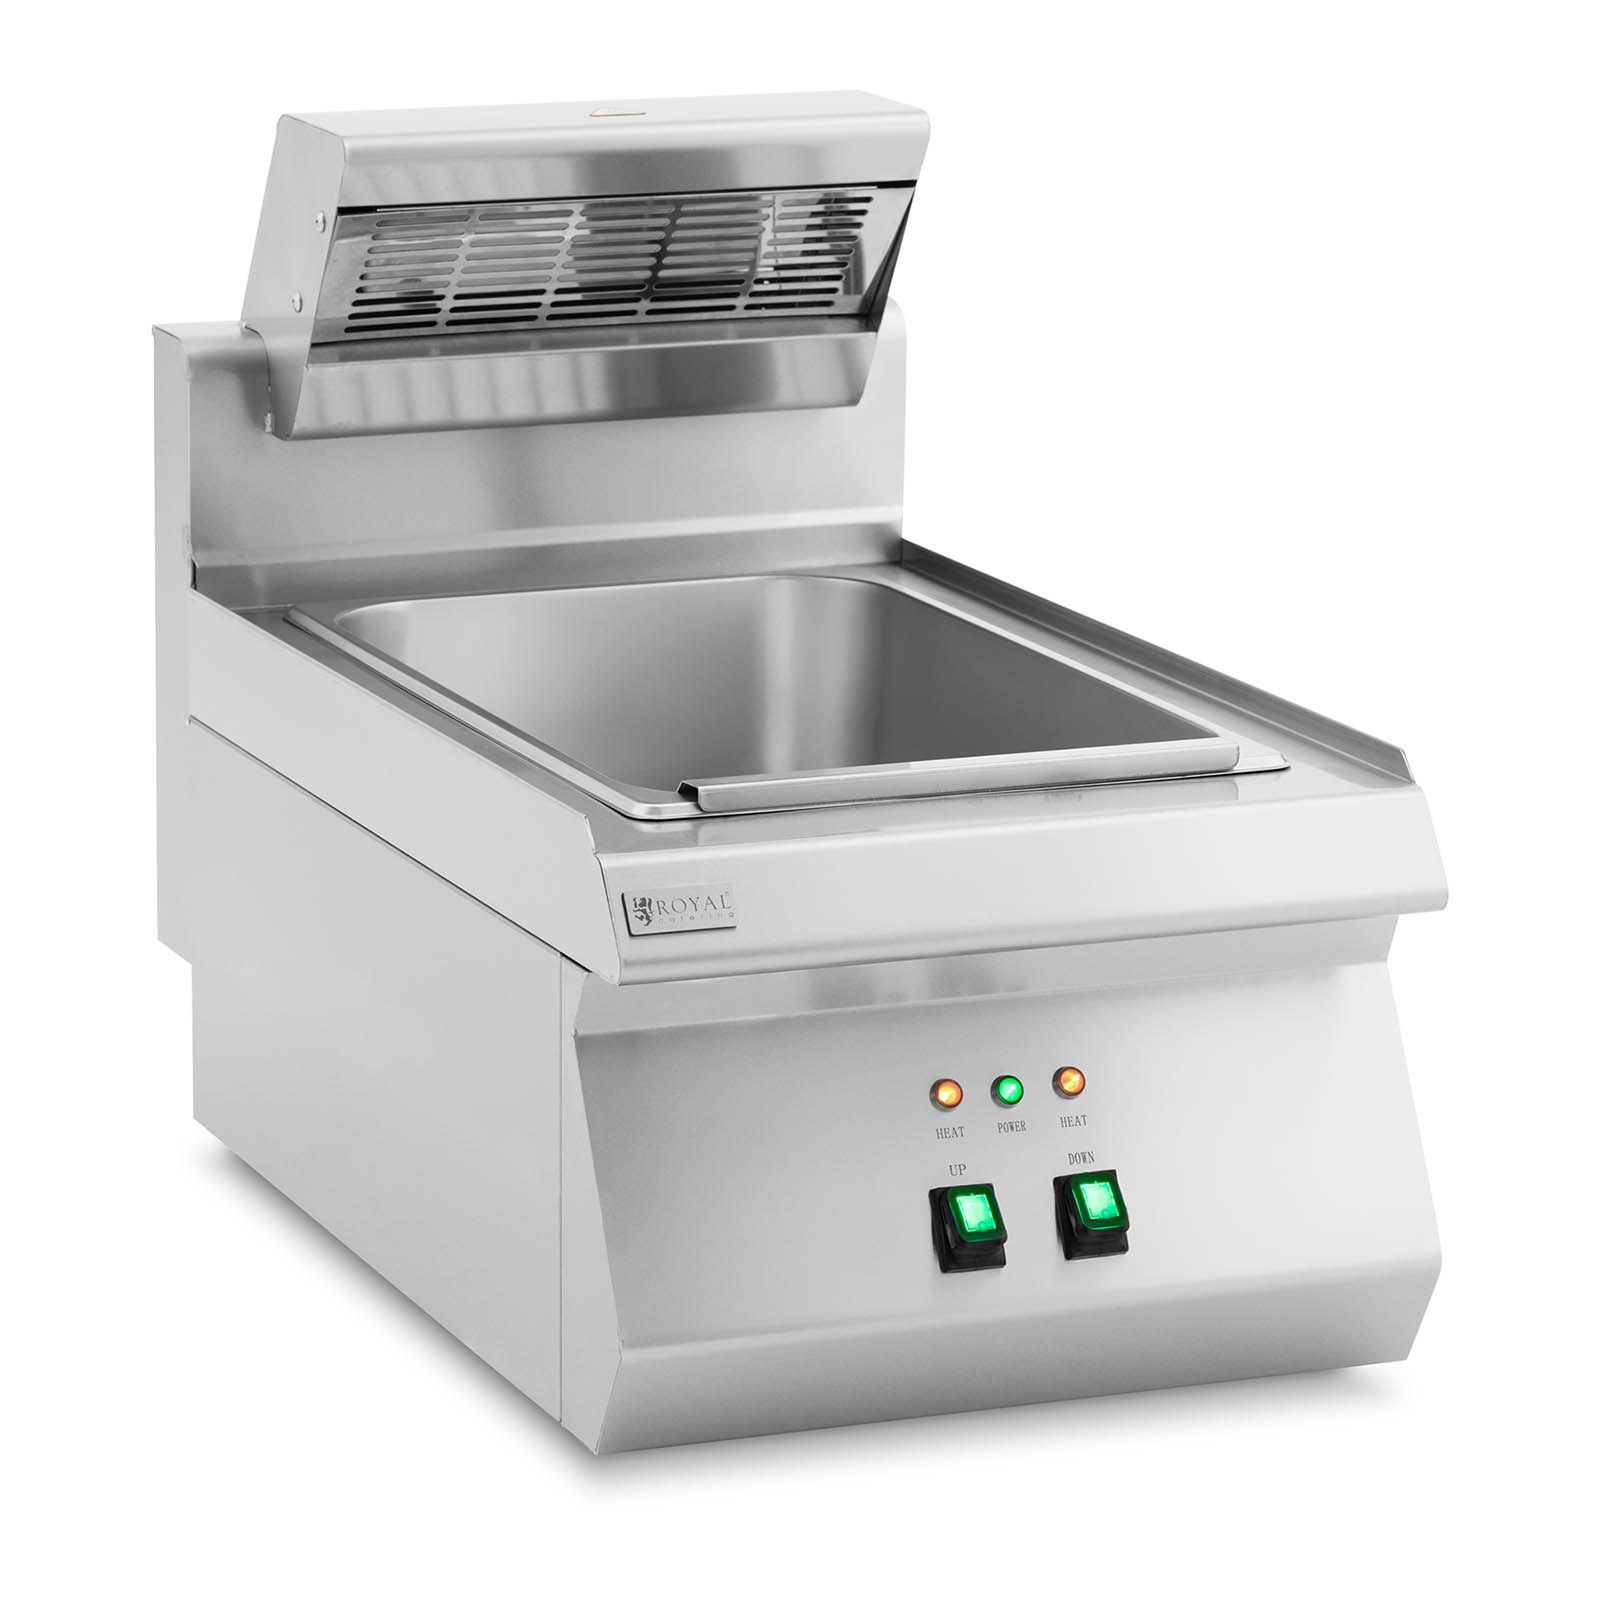 Scaldapatatine - 1100 W - 30 - 150 °C - Royal Catering